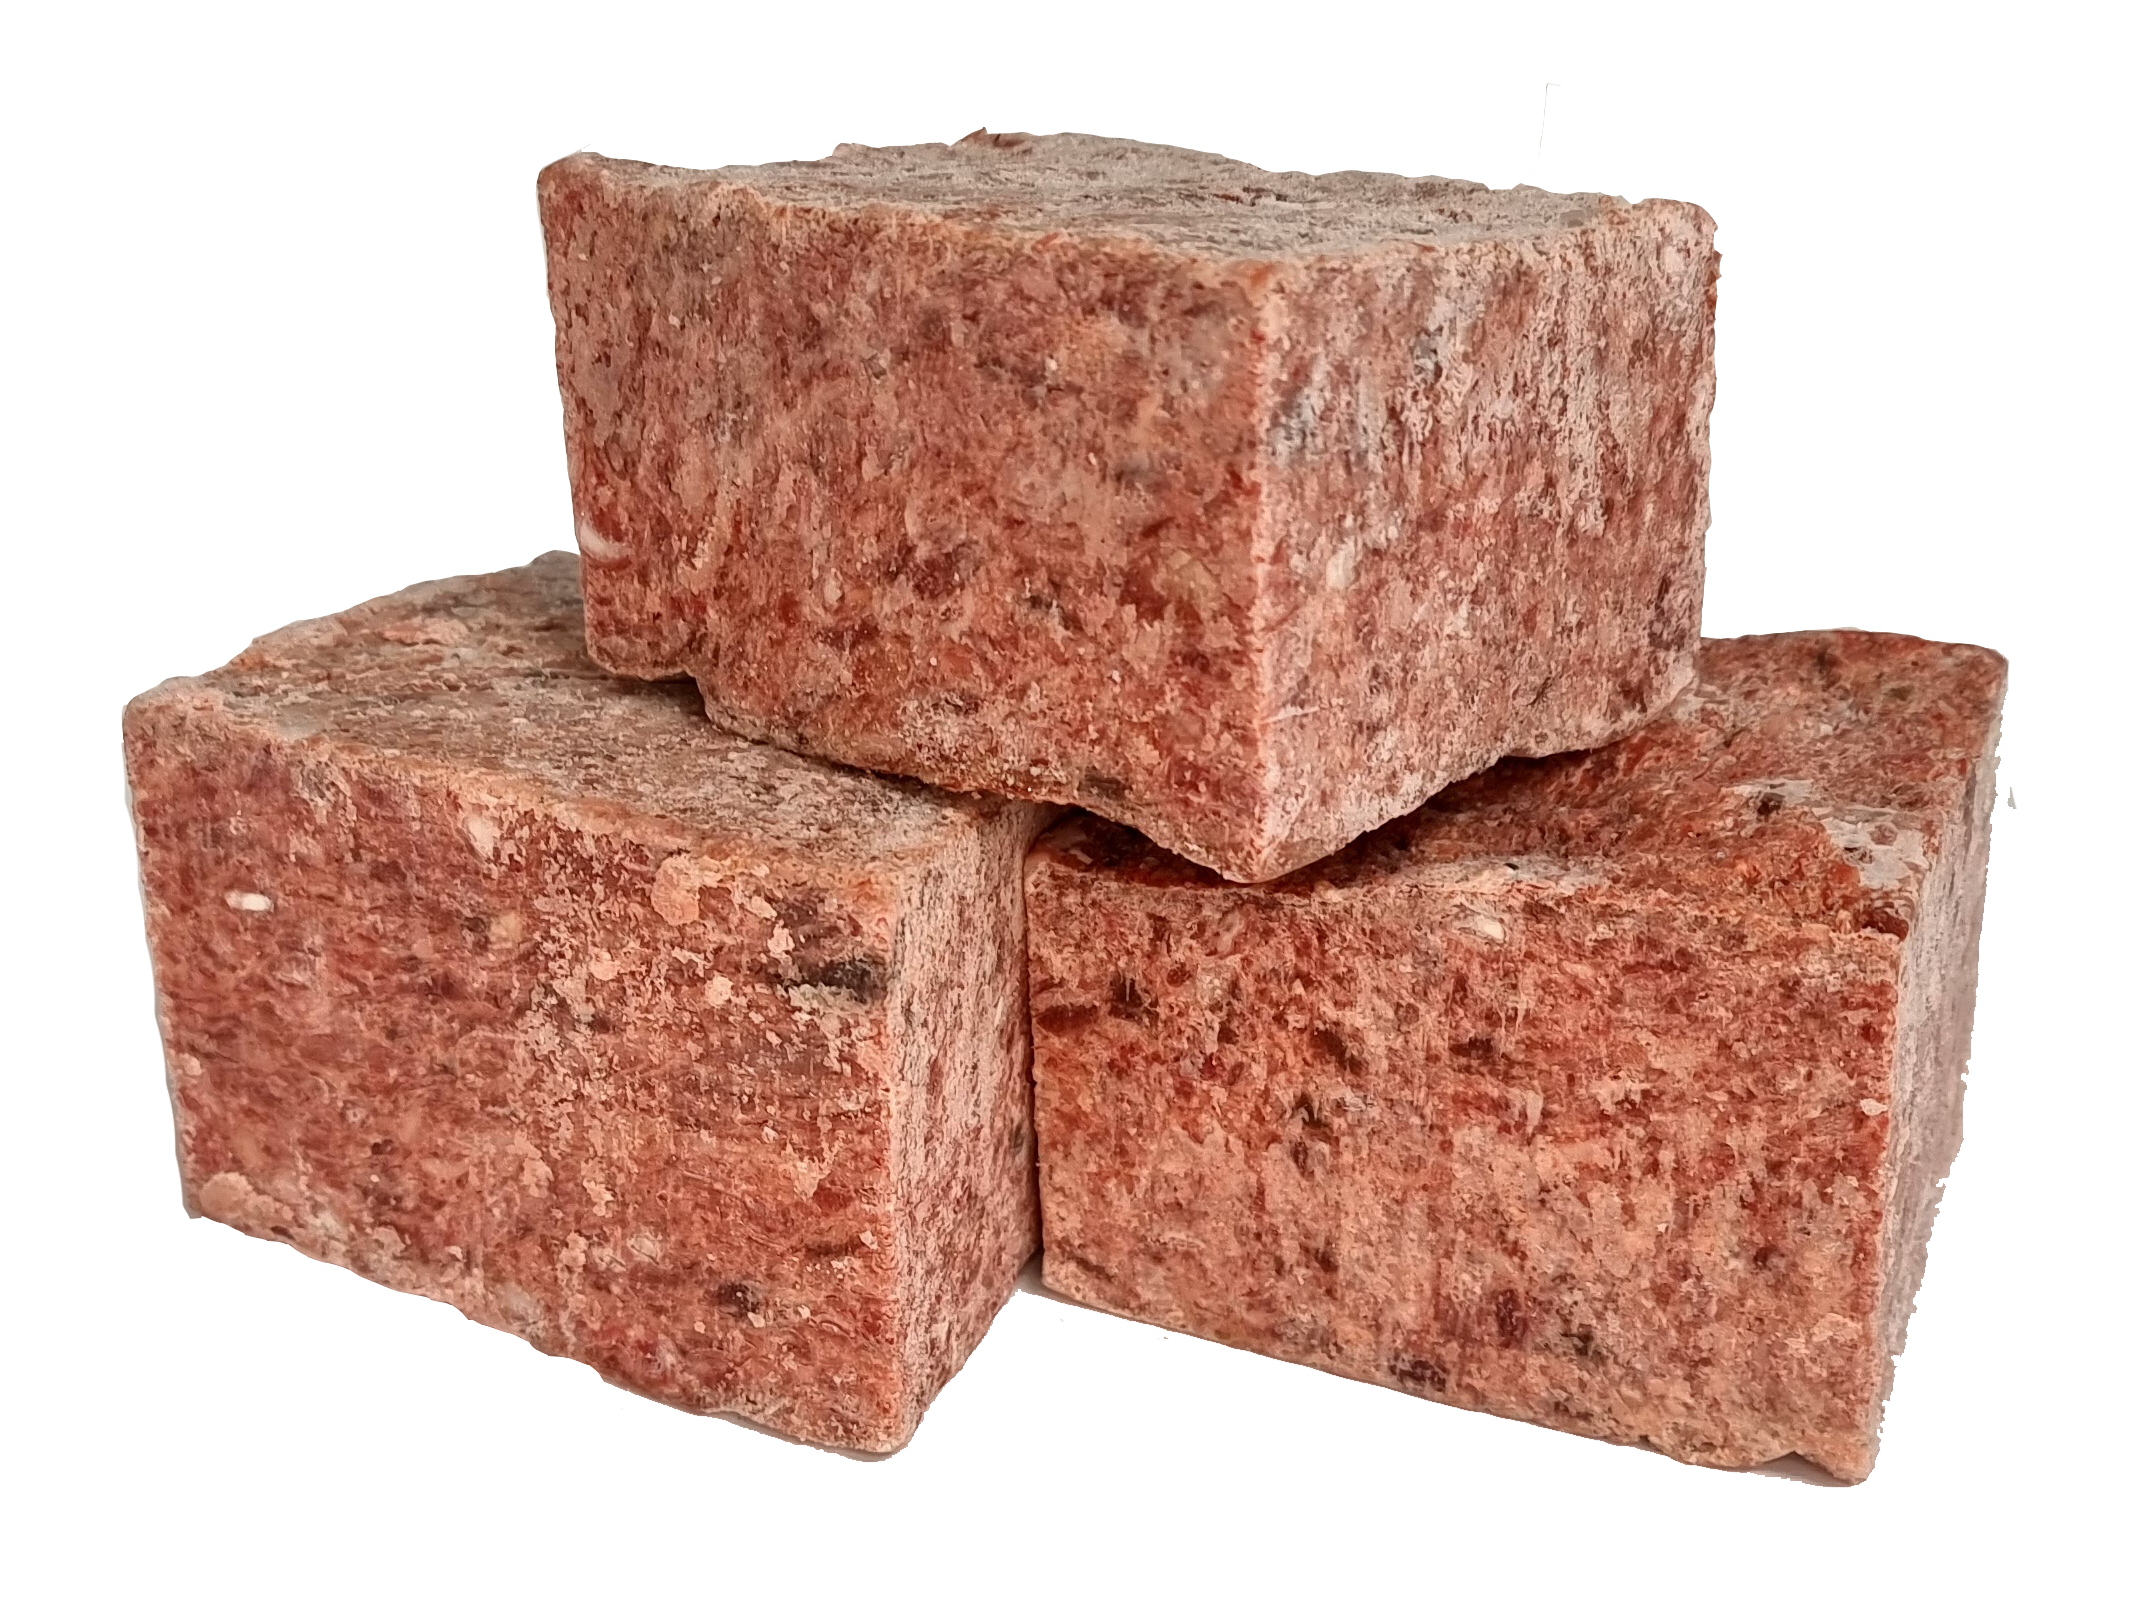 Beef & Chicken COMPLETE 10kgs (22lb) 24 x Small Blocks - Working Dog